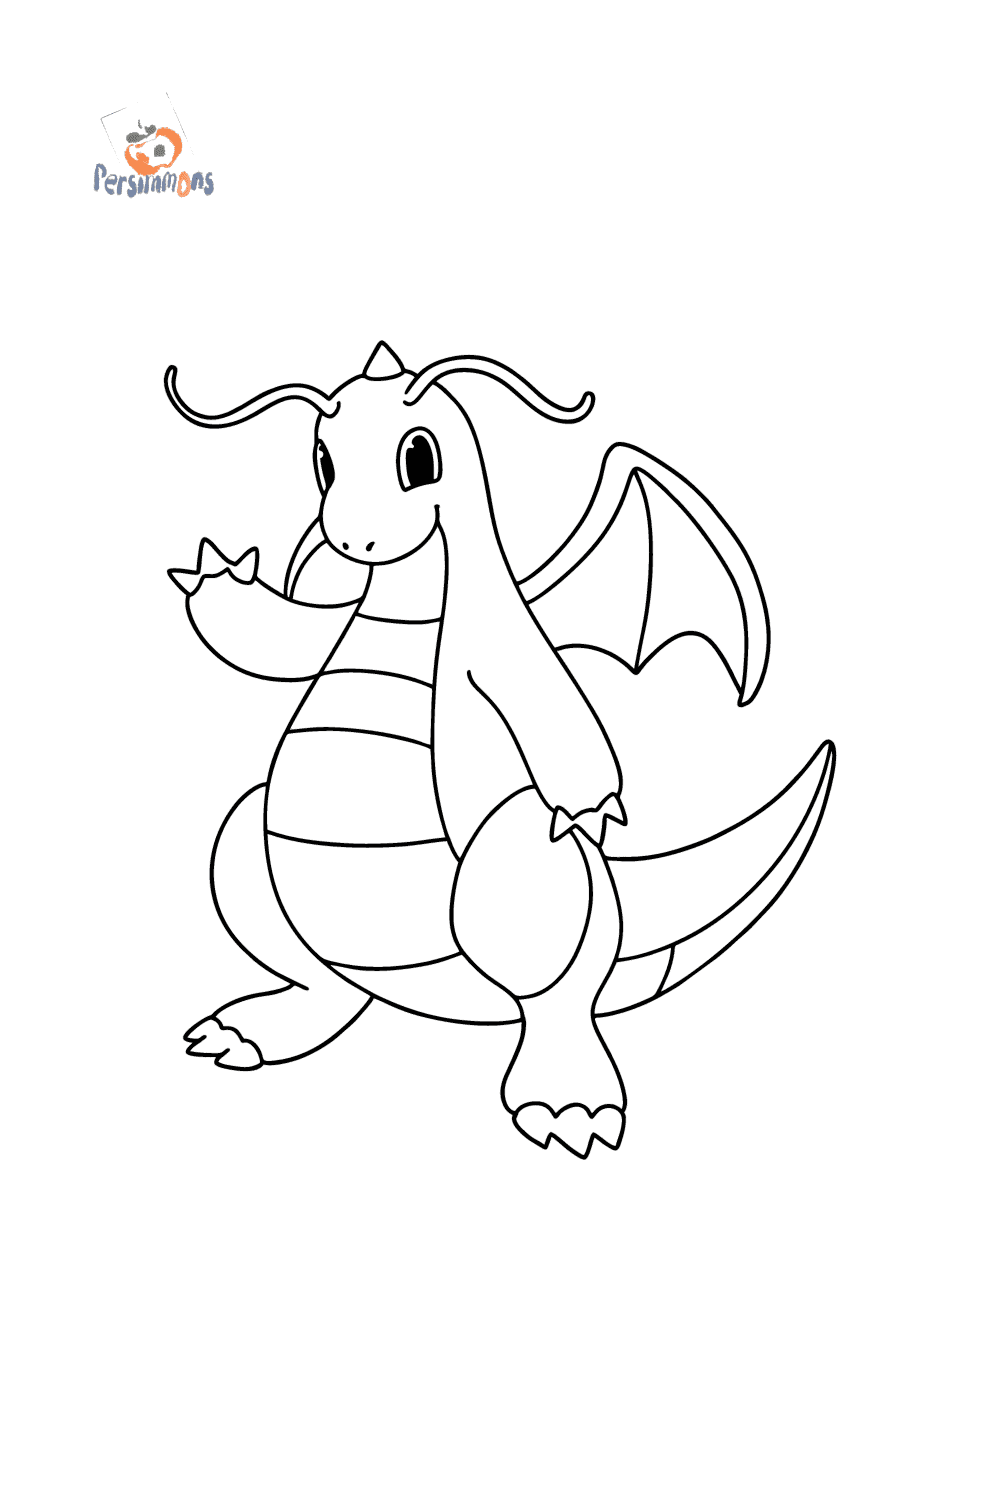 Pokemon go dragonite coloring page â online and print for free